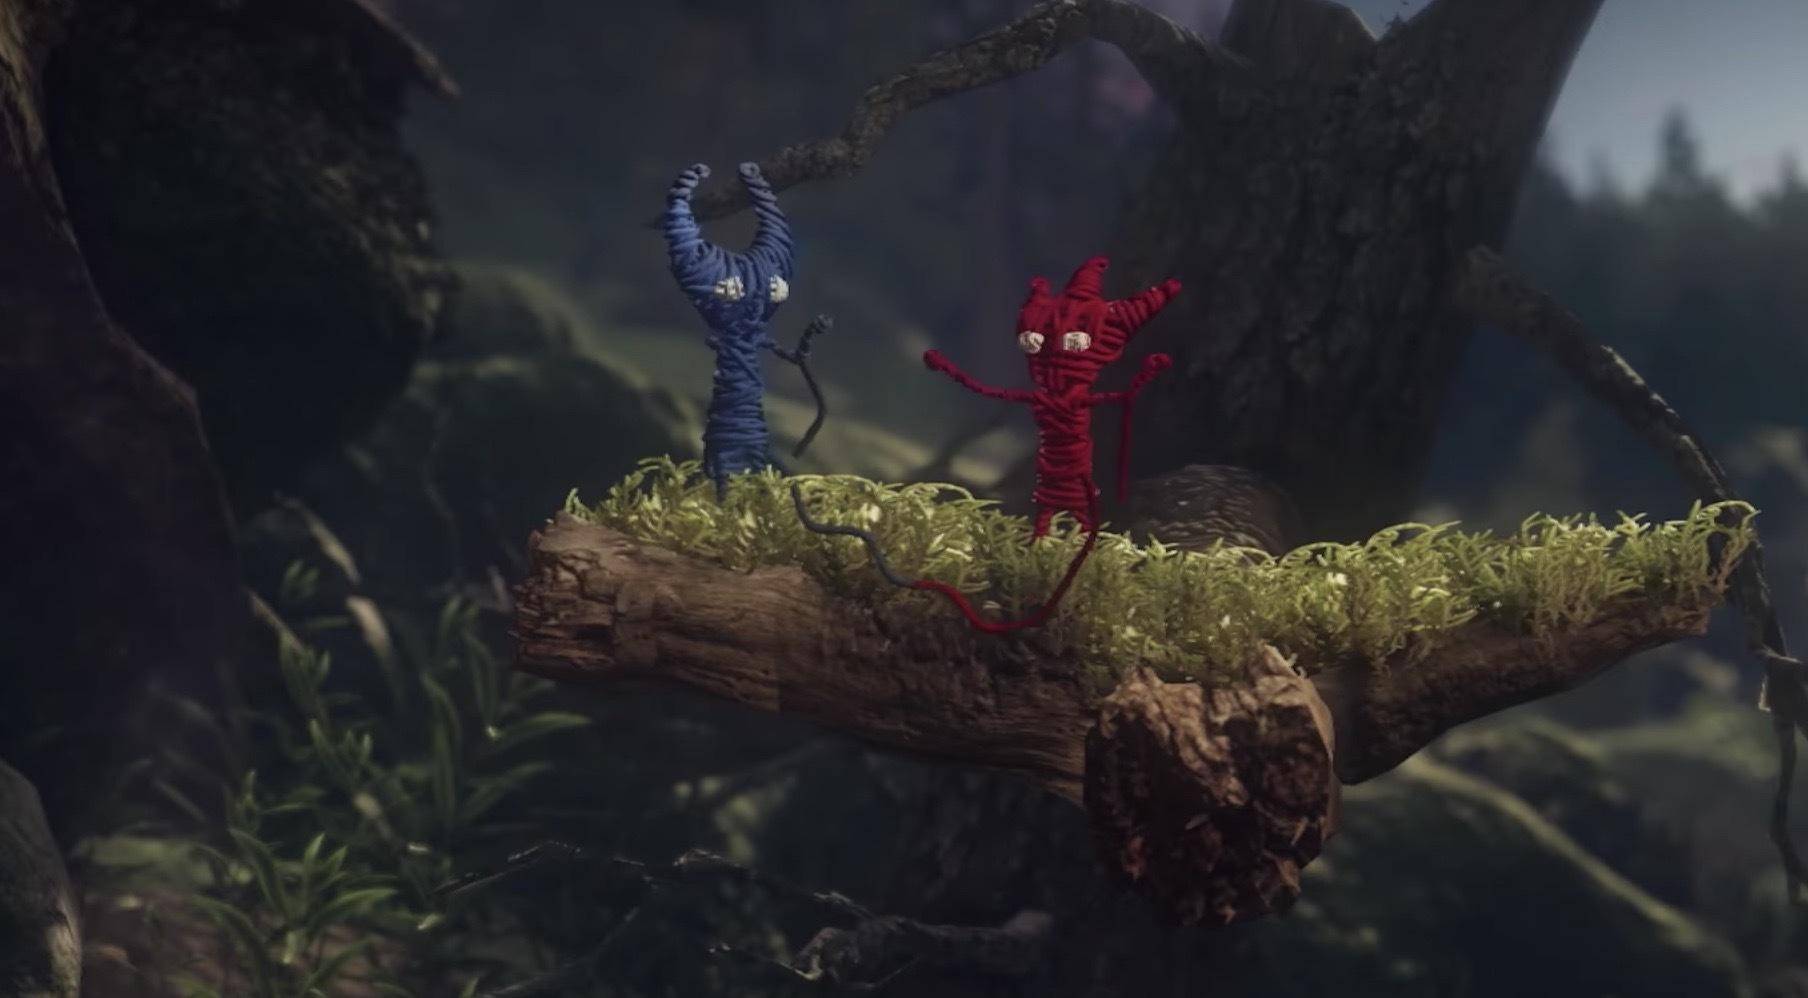 Unravel (PS4) cheap - Price of $11.75